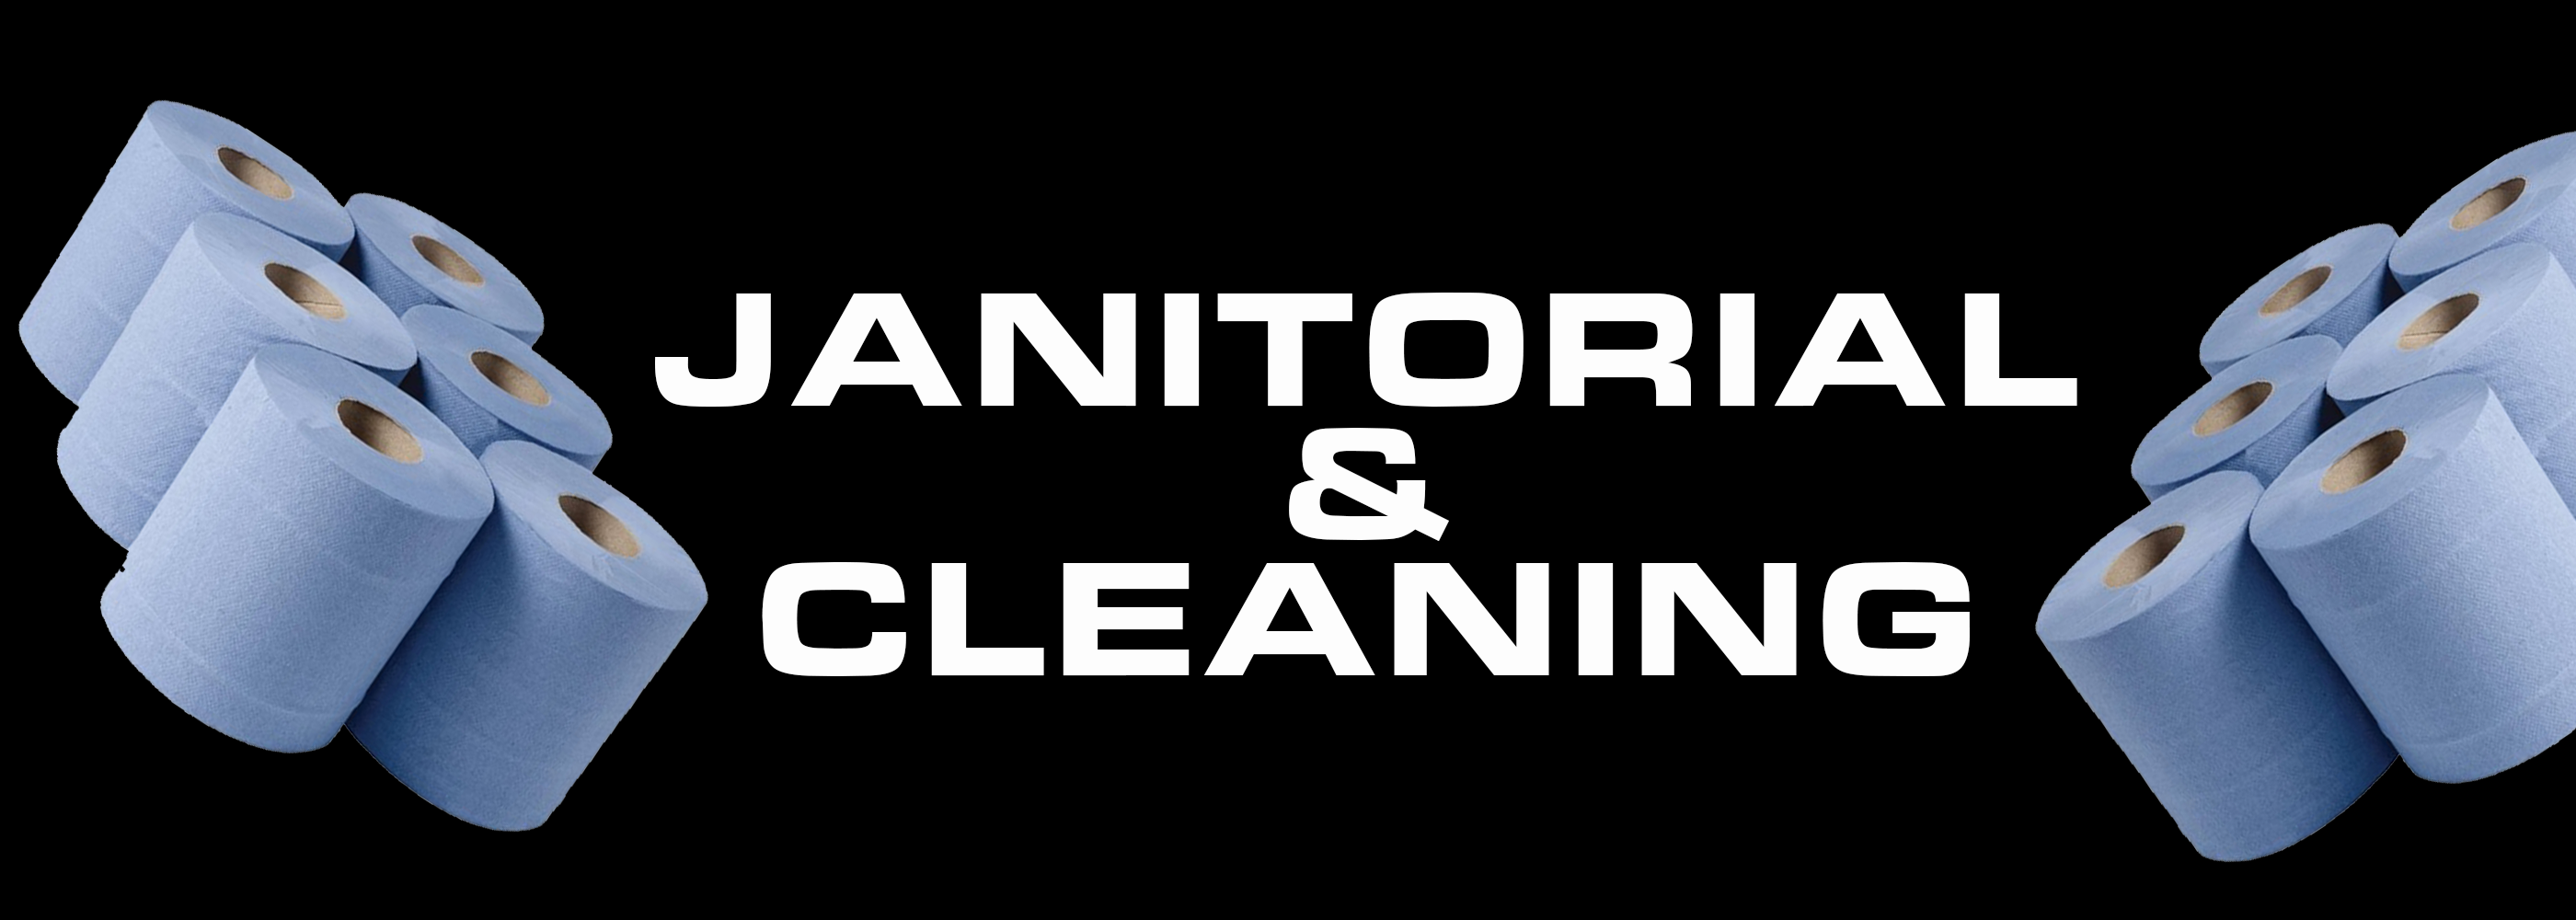 JANITORIAL & CLEANING